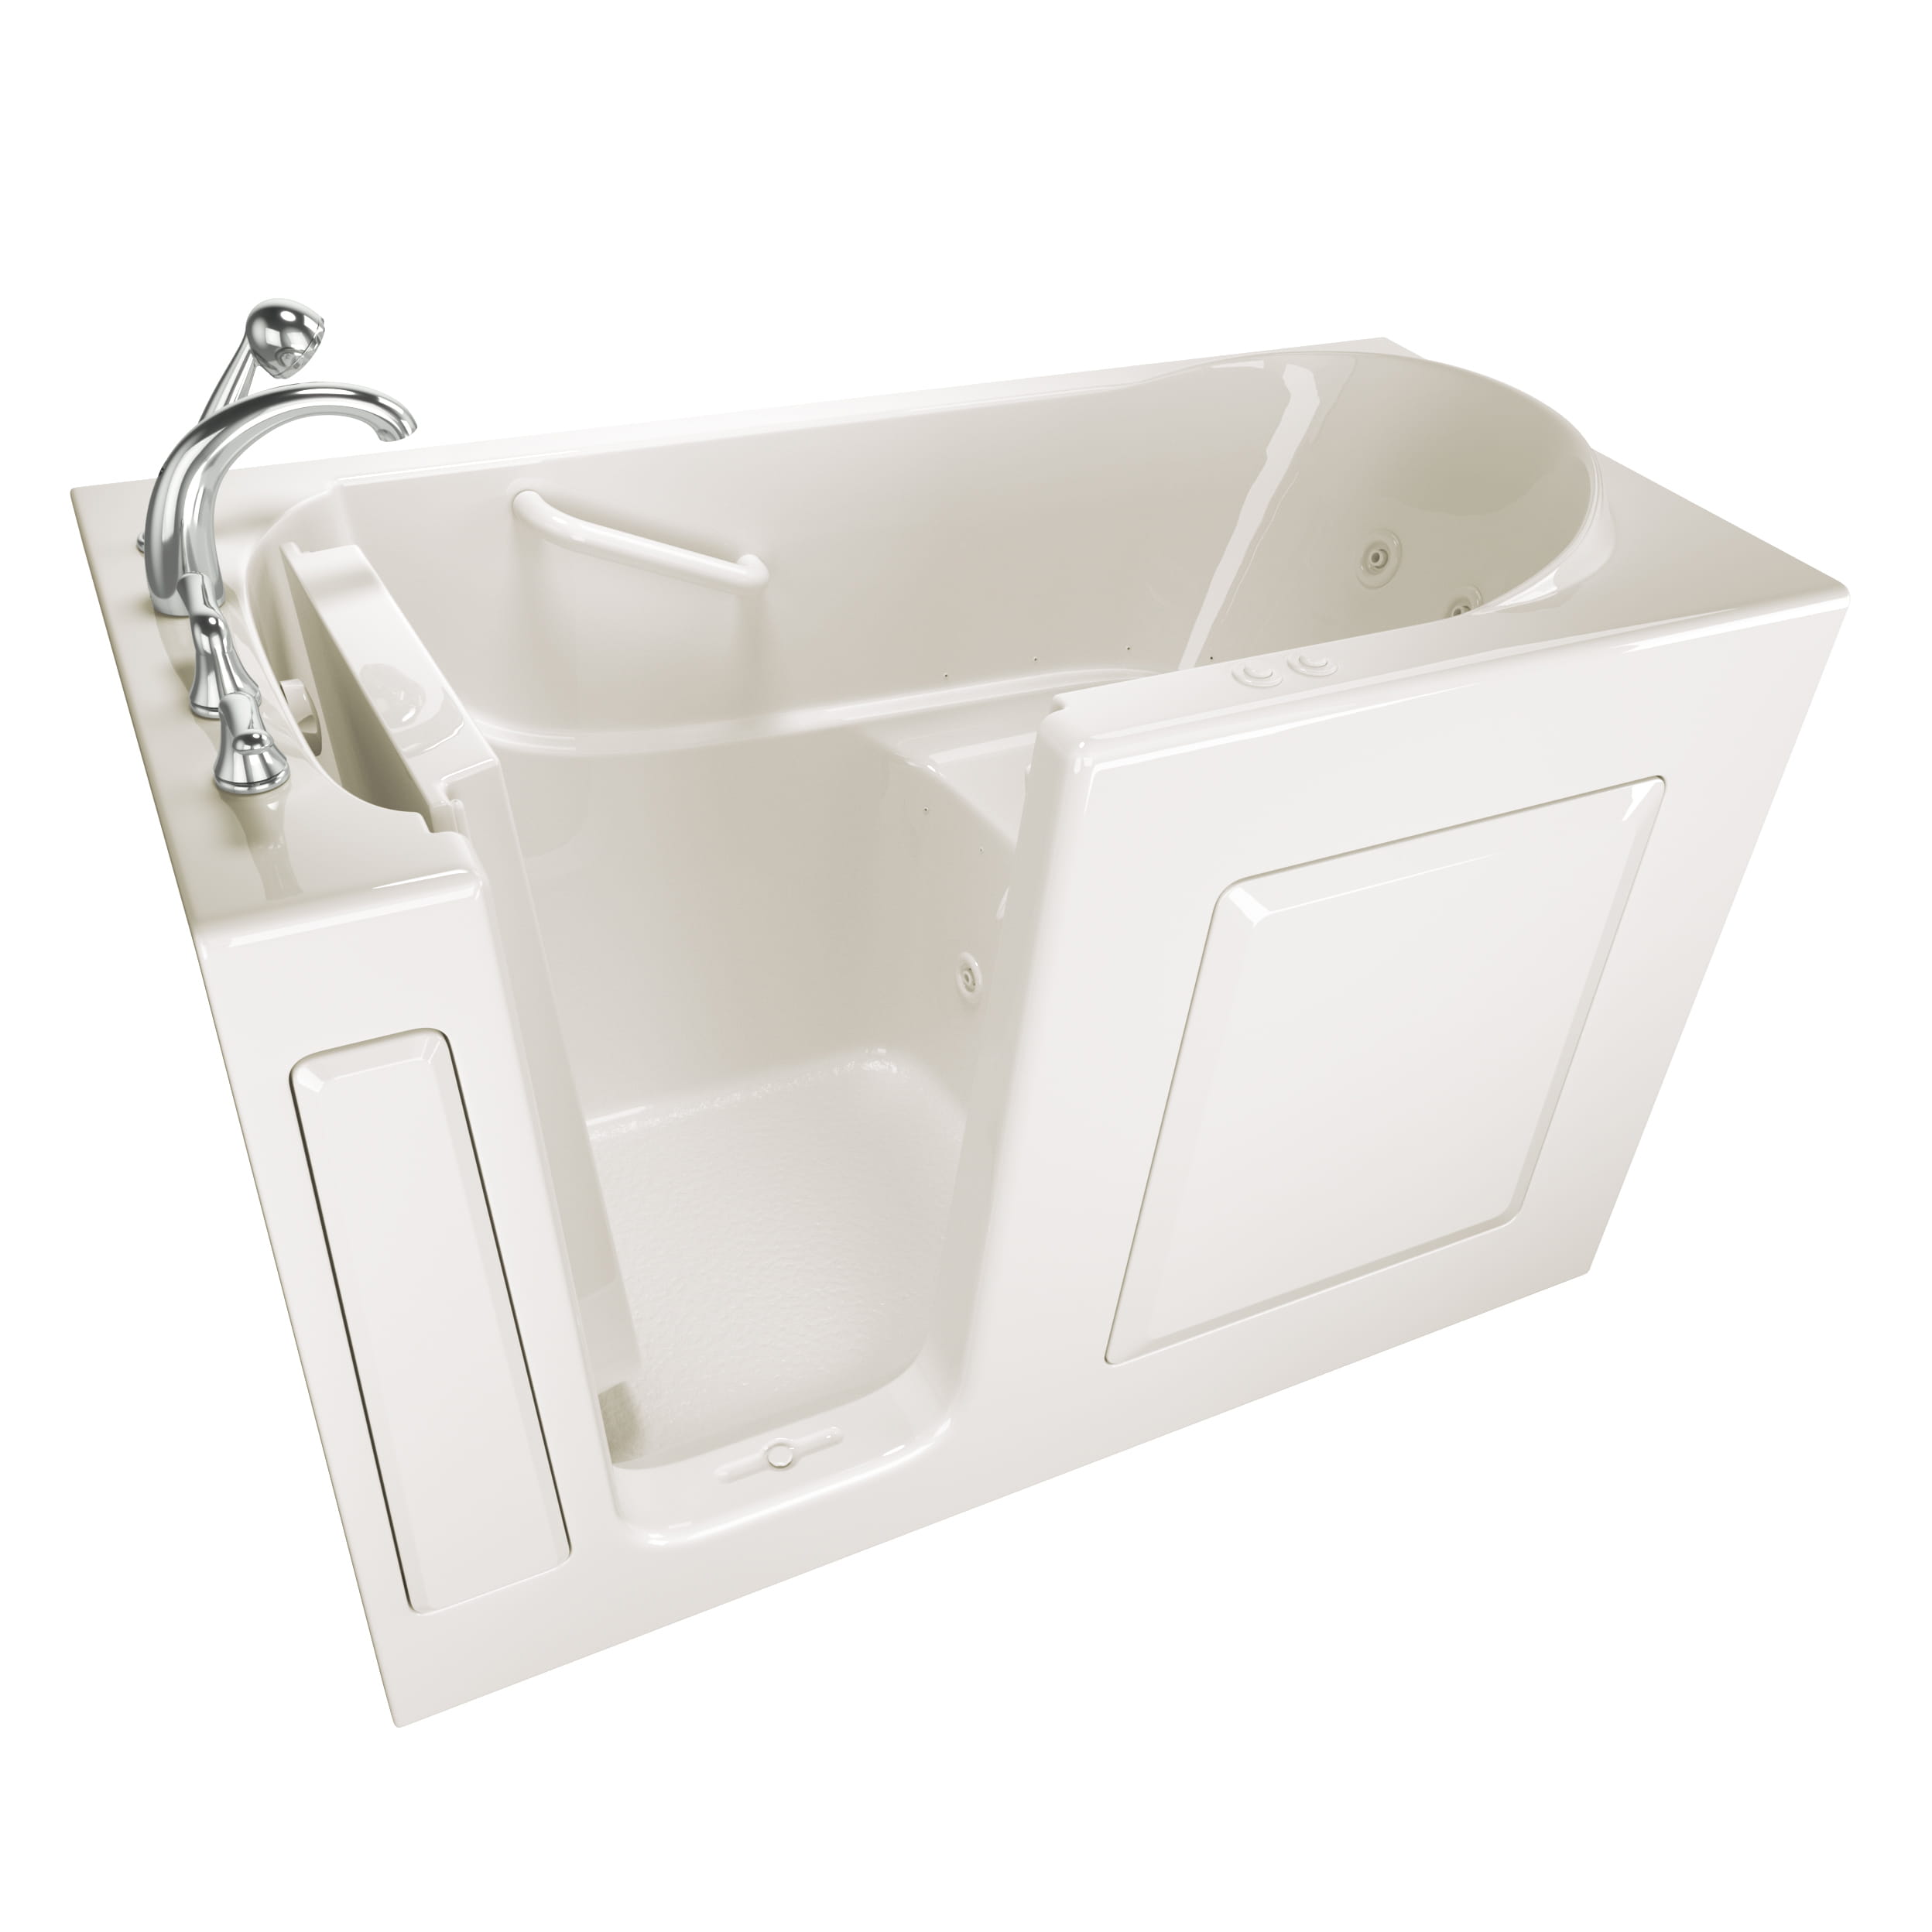 Gelcoat Entry Series 60 x 30-Inch Walk-In Tub With Combination Air Spa and Whirlpool Systems – Left-Hand Drain With Faucet